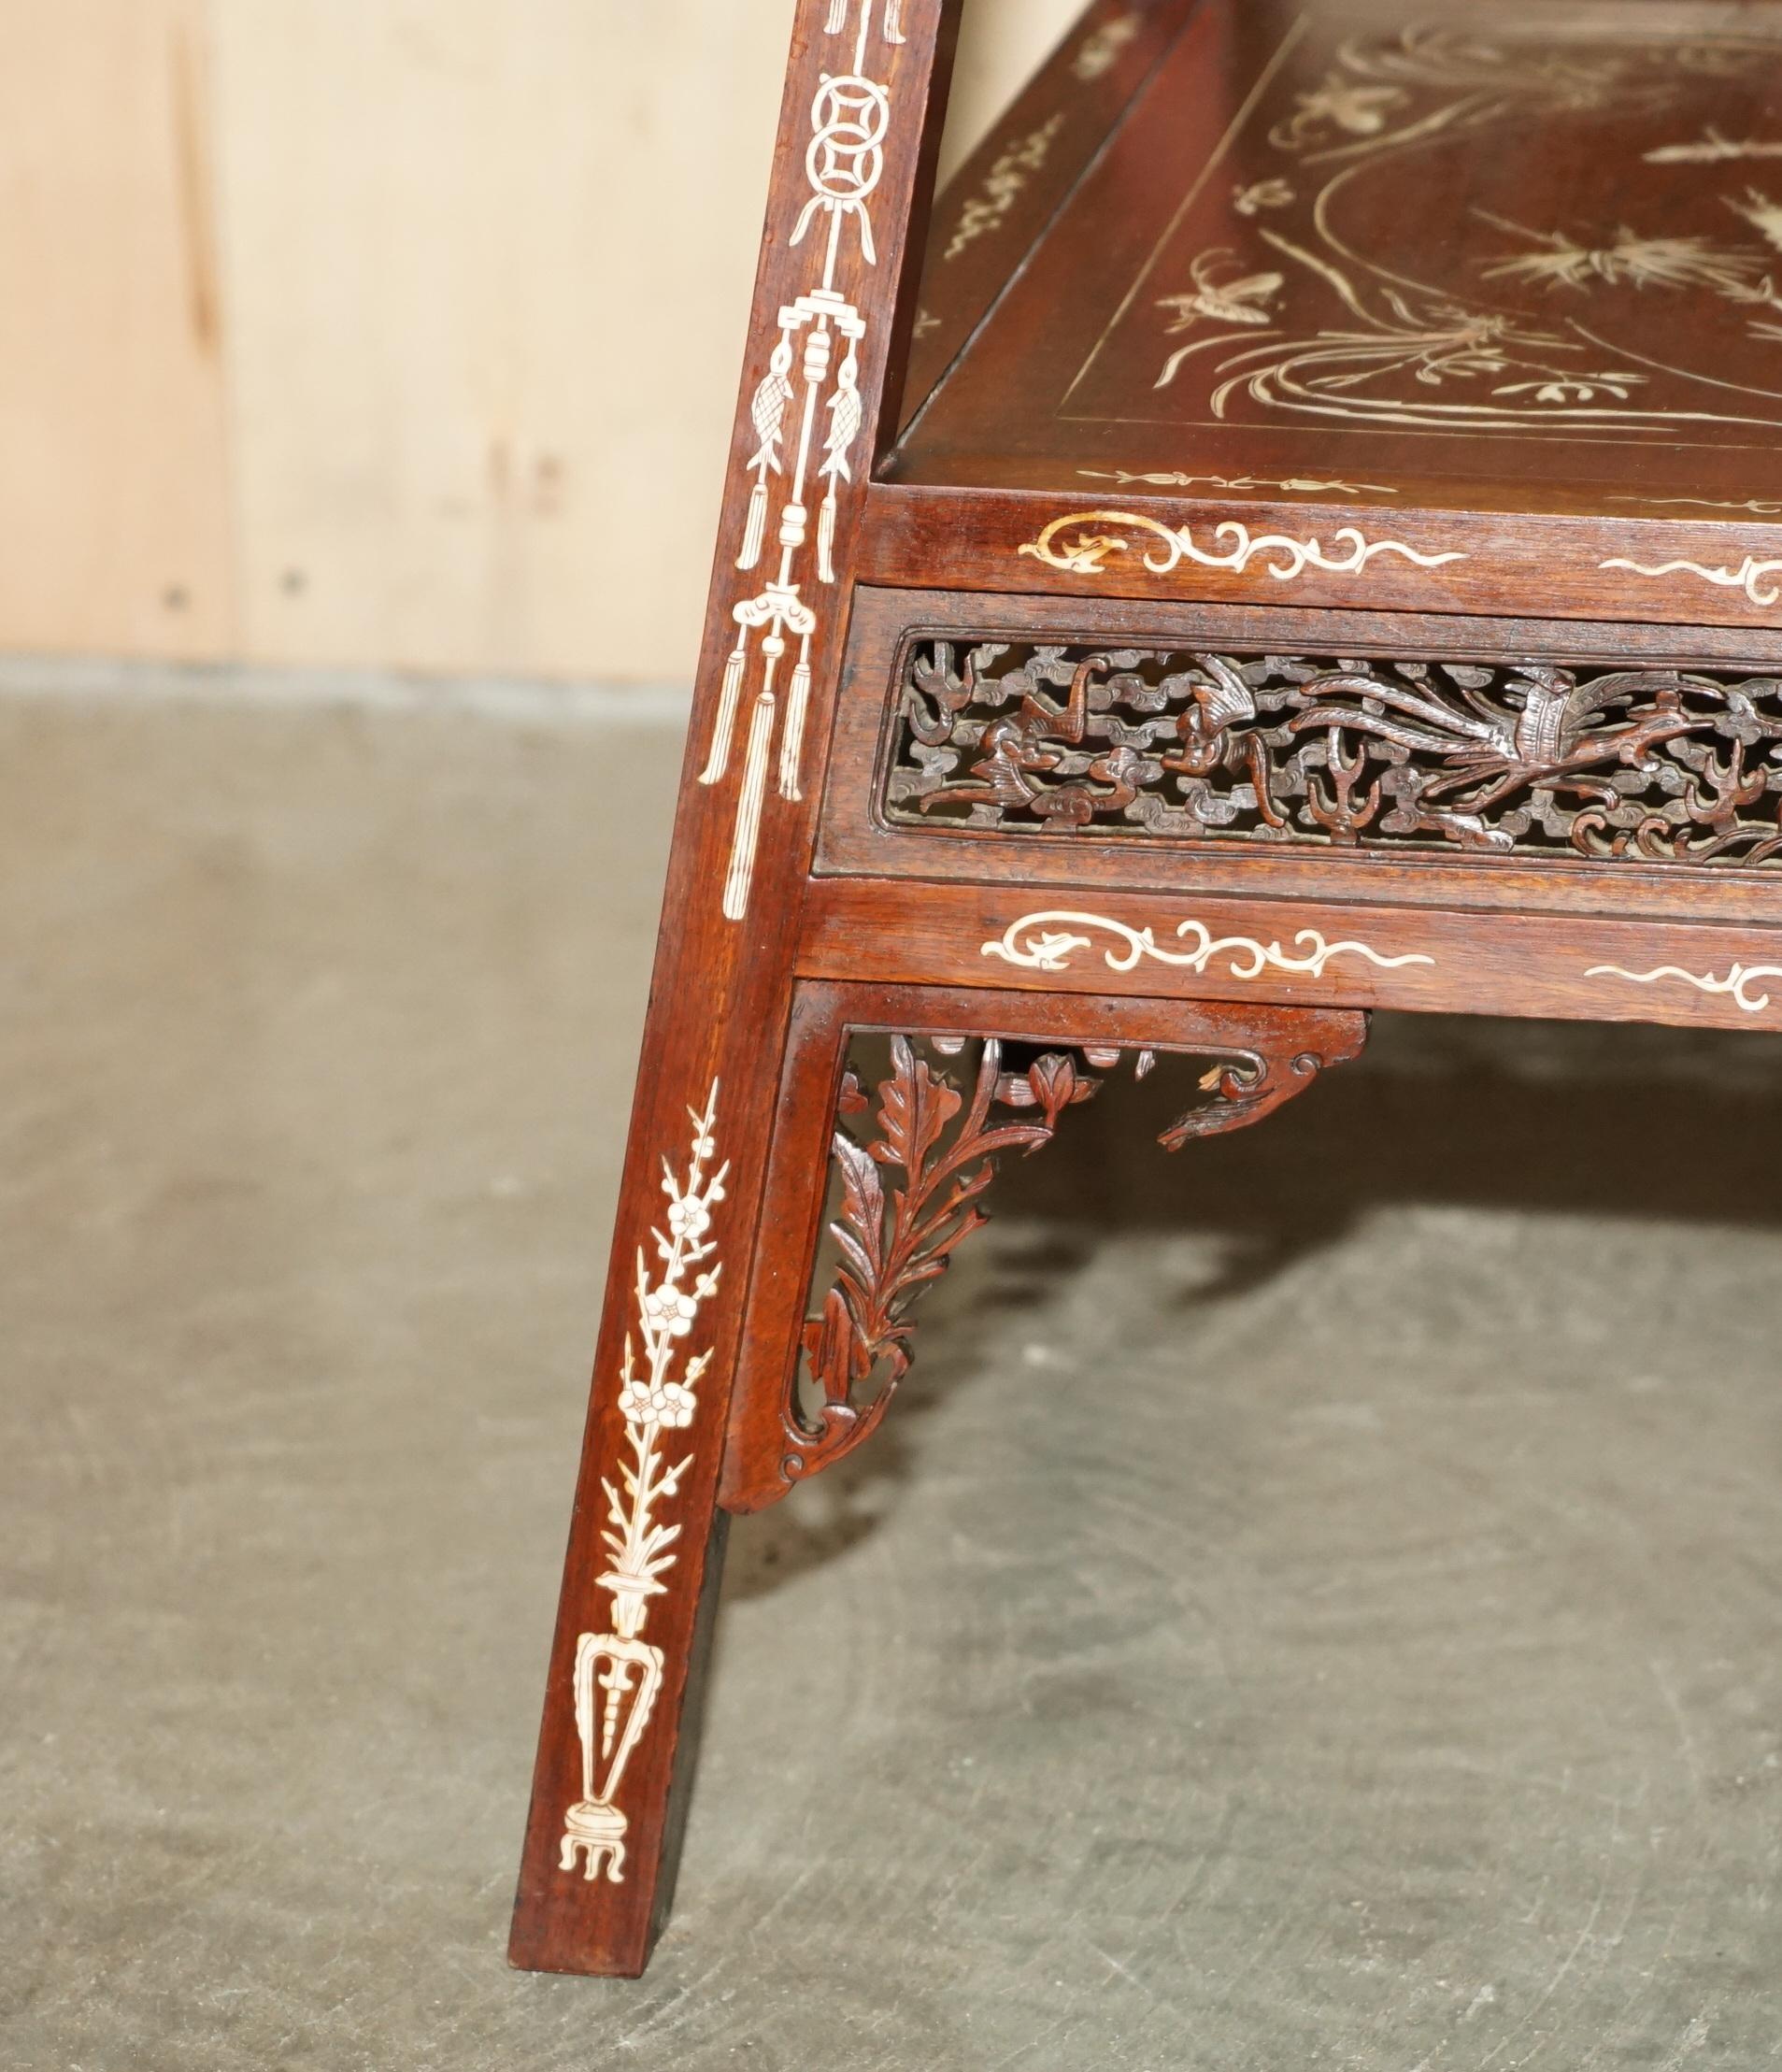 ANTIQUE CIRCA 1900ORNATELY CARVED AND HEAViLY INLAID CHINESE OCCASIONAL TABLE (Handgefertigt) im Angebot